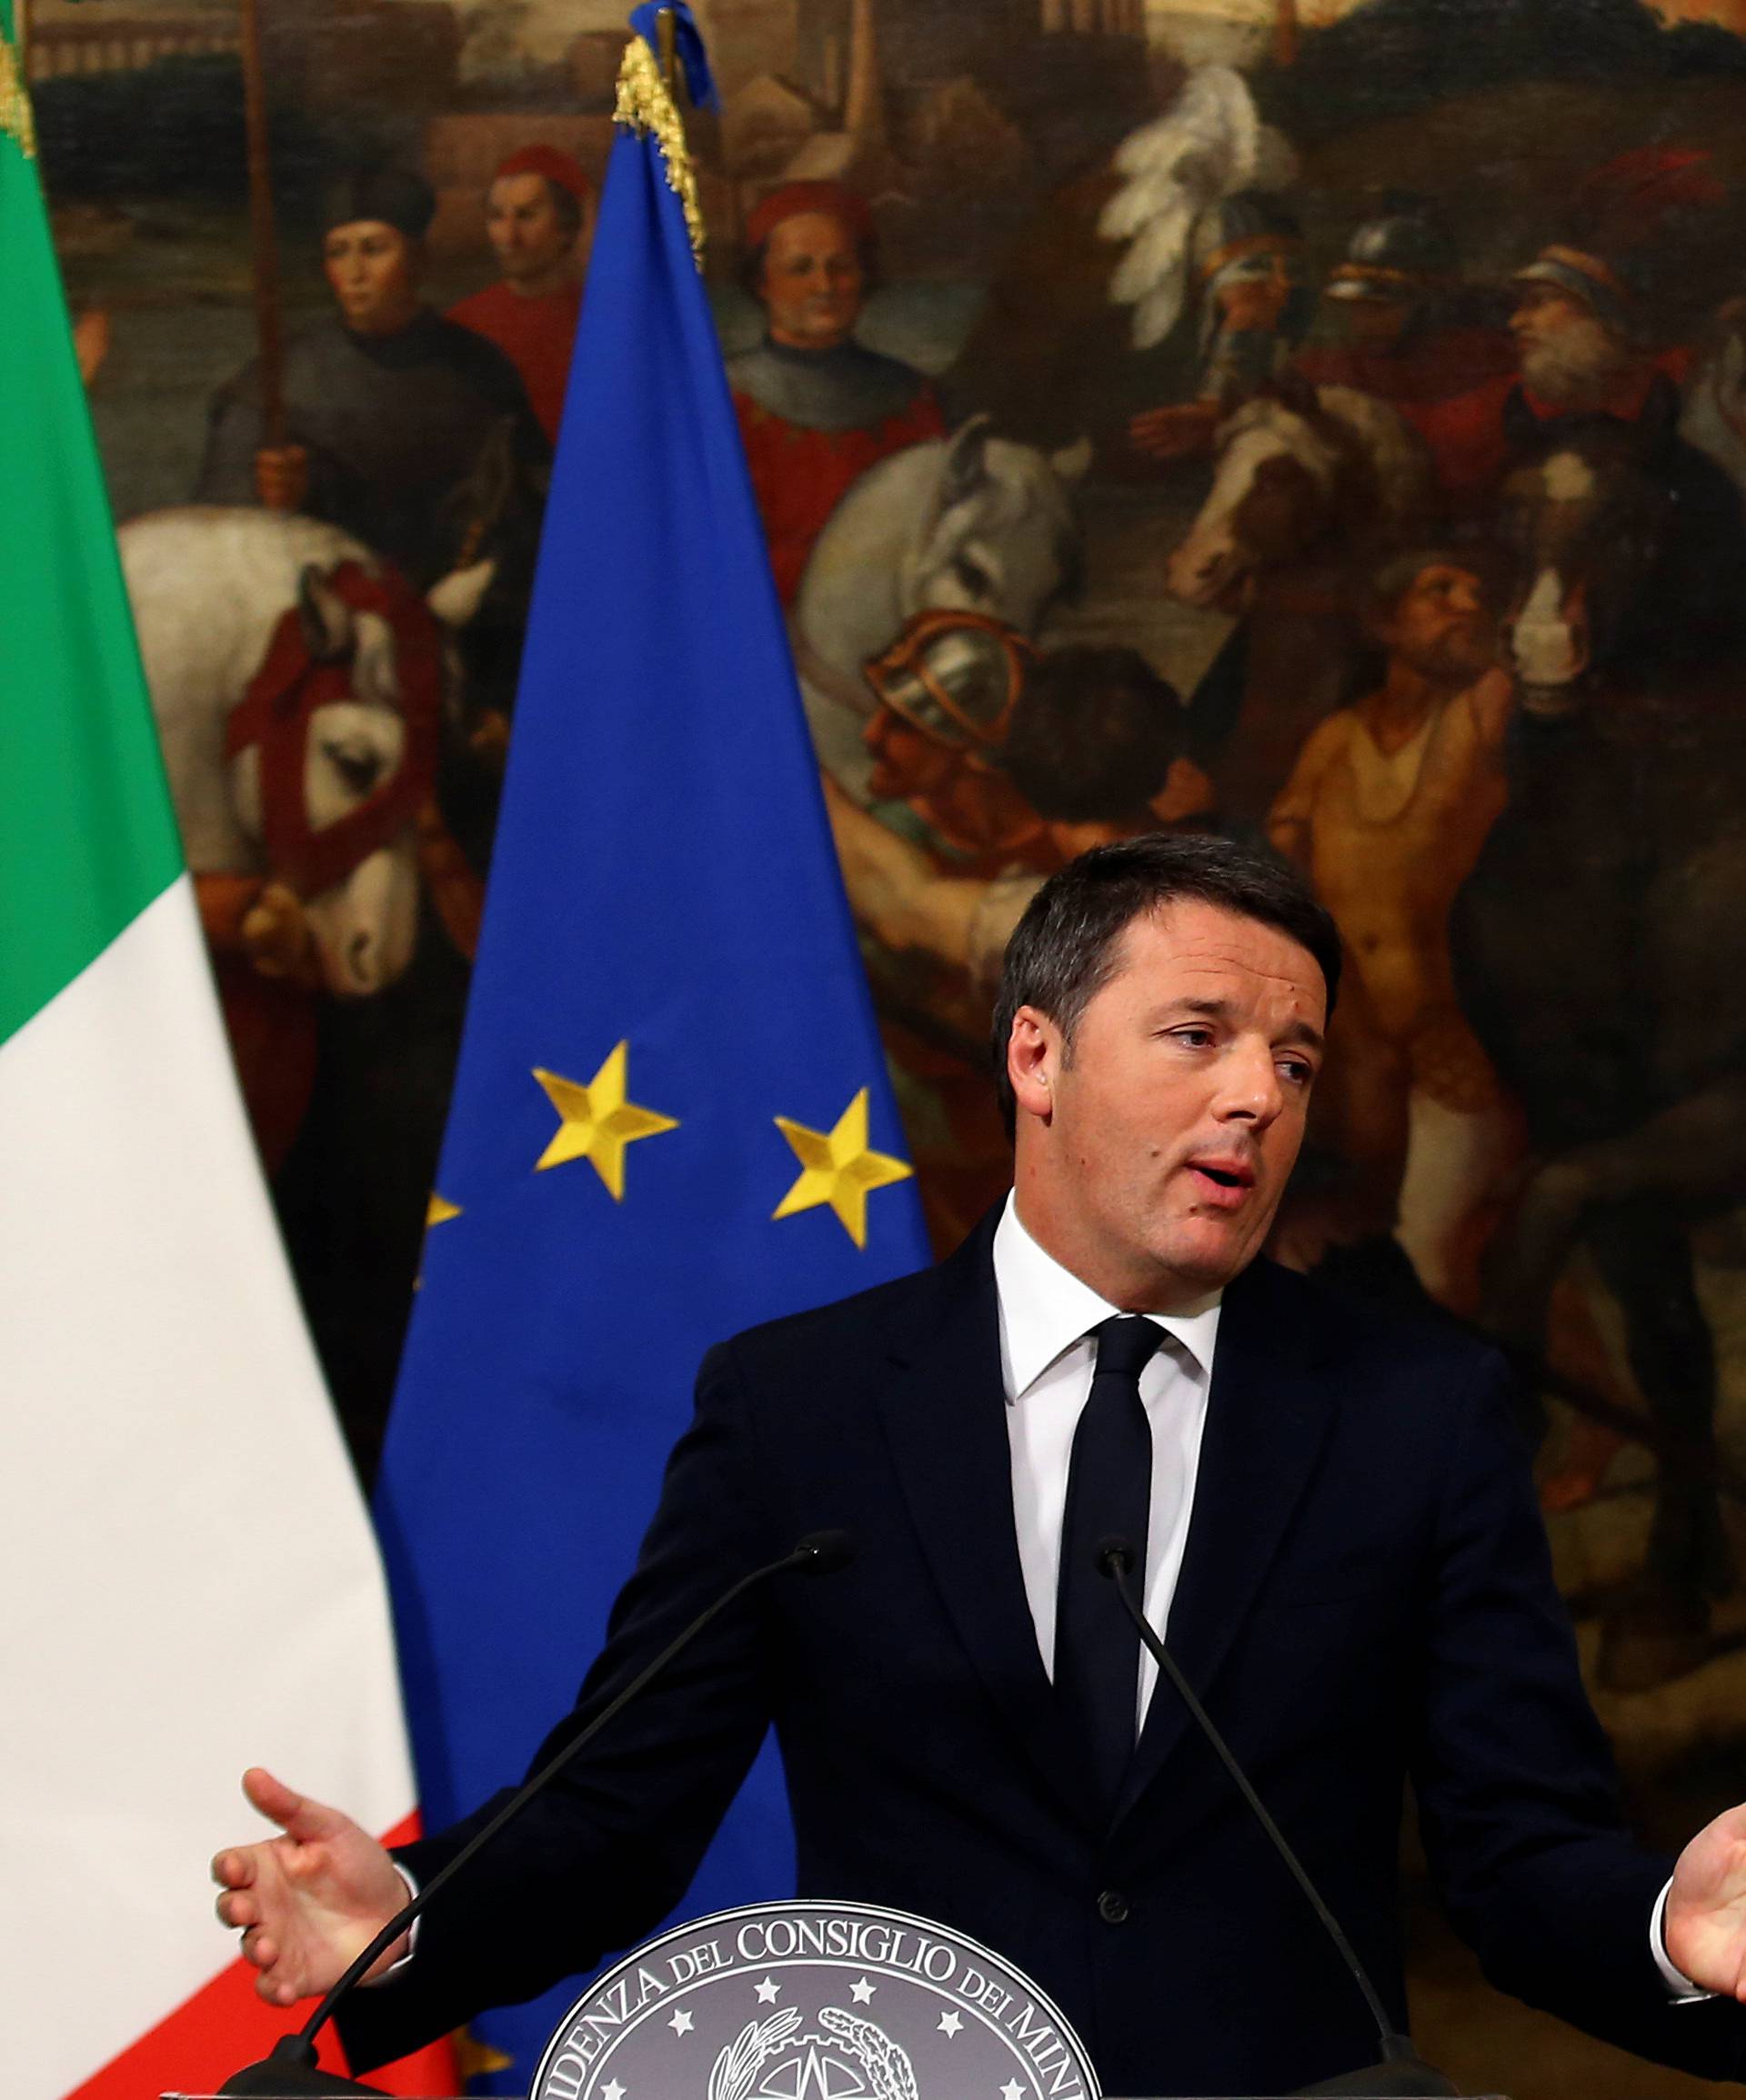 Italian Prime Minister Matteo Renzi speaks during a media conference after a referendum on constitutional reform  at Chigi palace in Rome